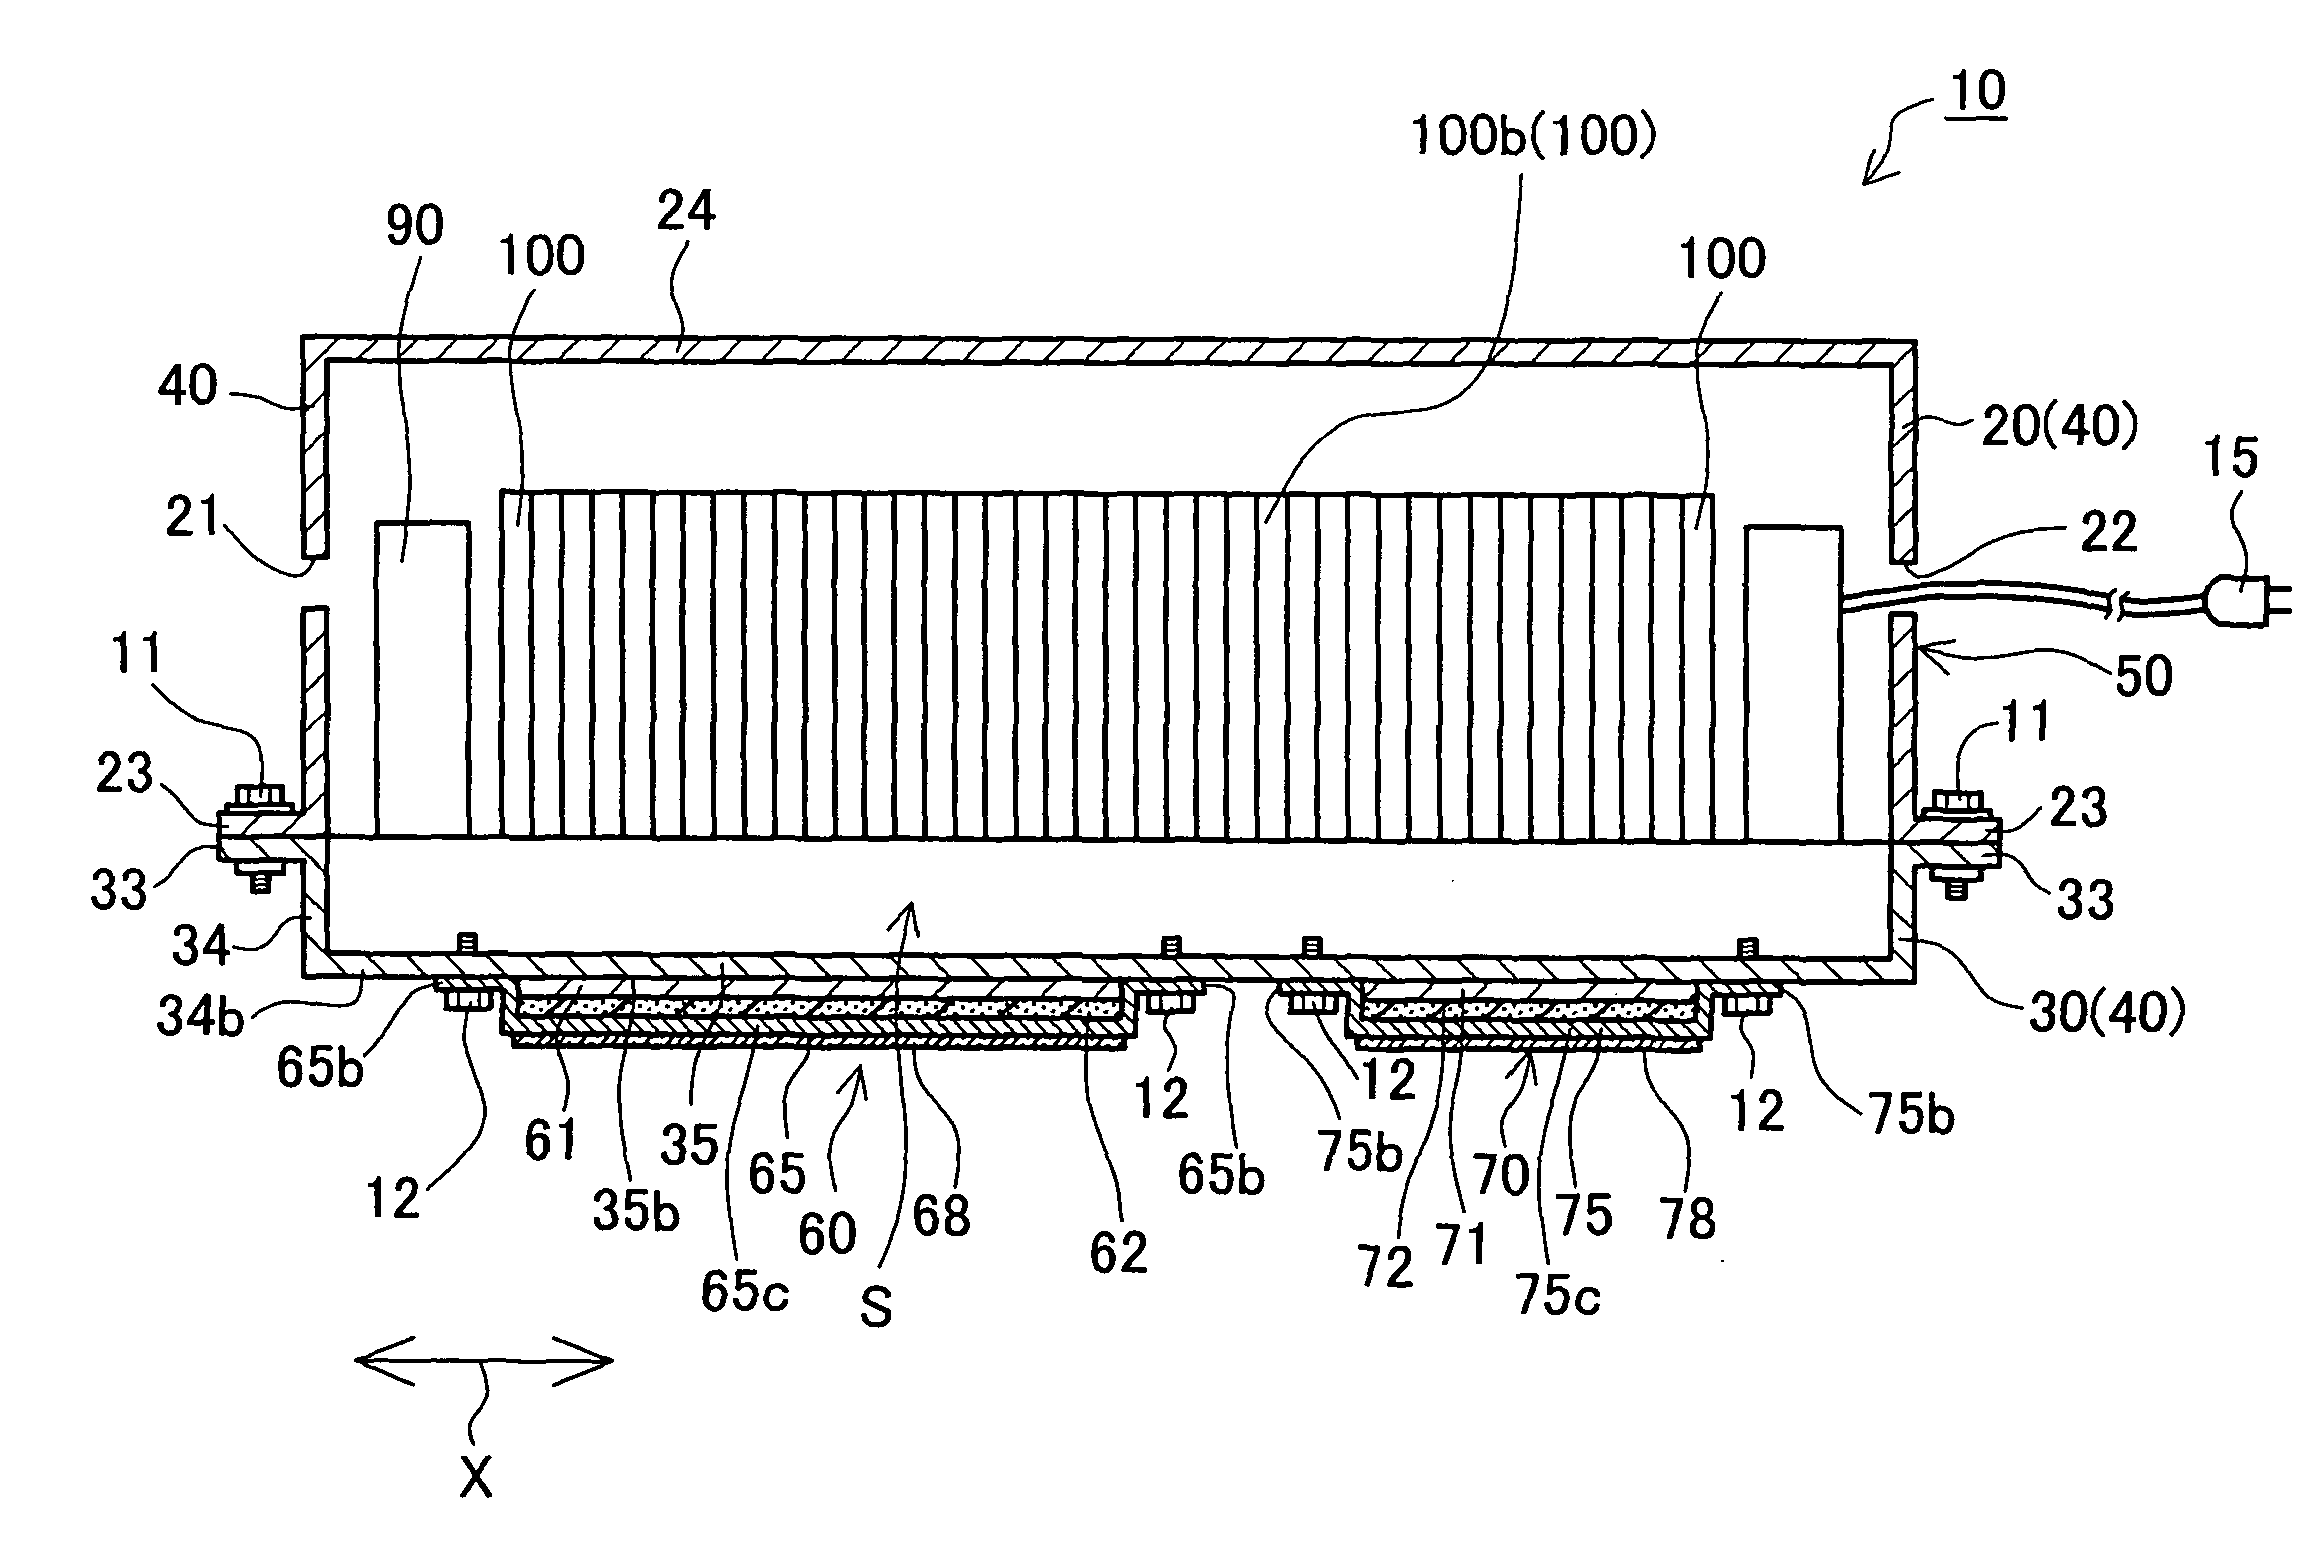 Heater unit and battery structure with heater